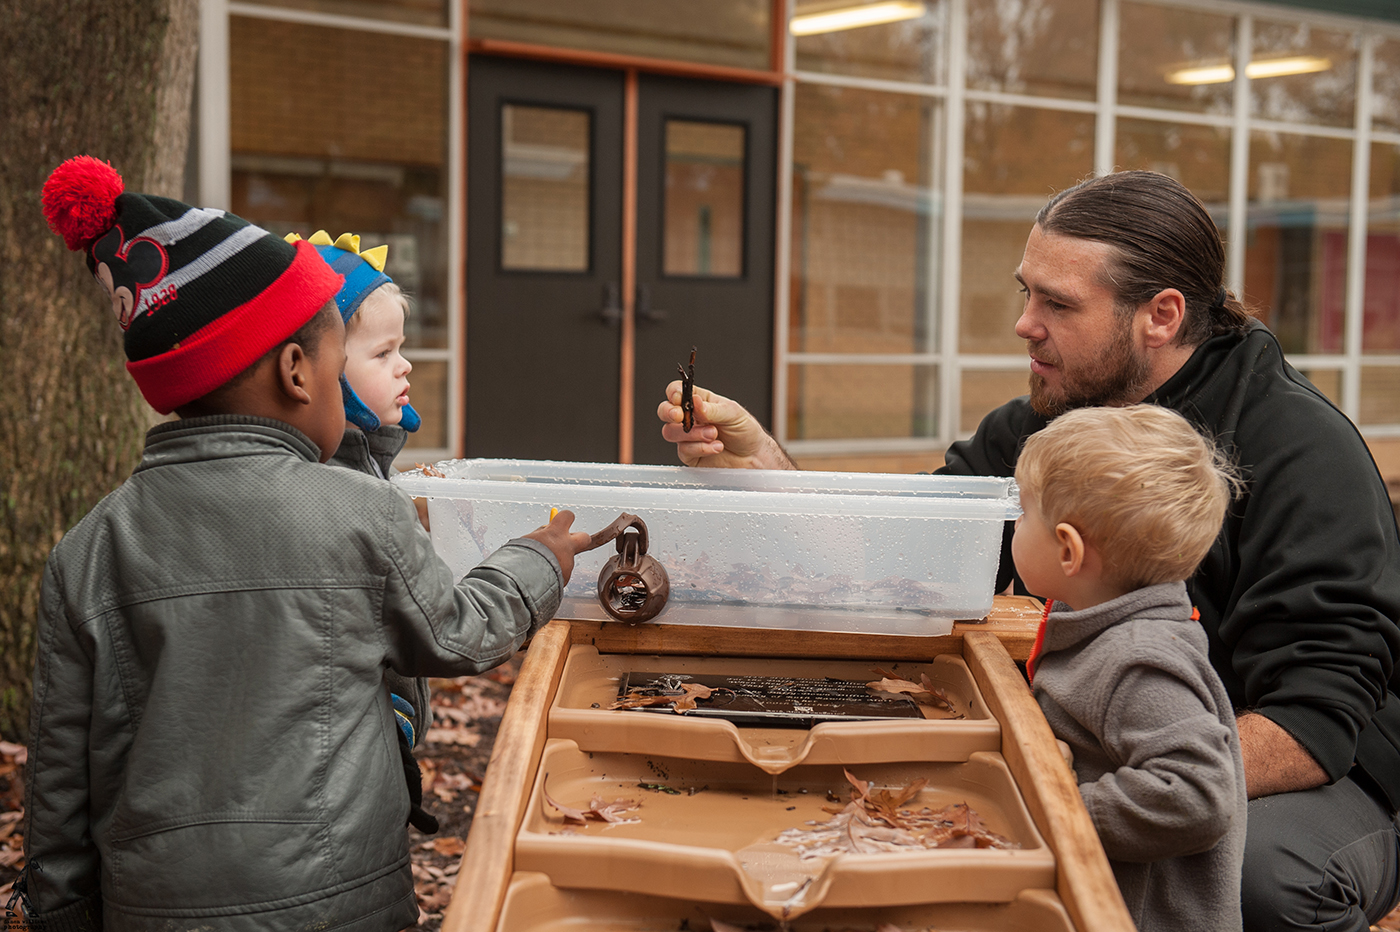 A group of children play at an outdoor water table while a man shows them a small leaf.